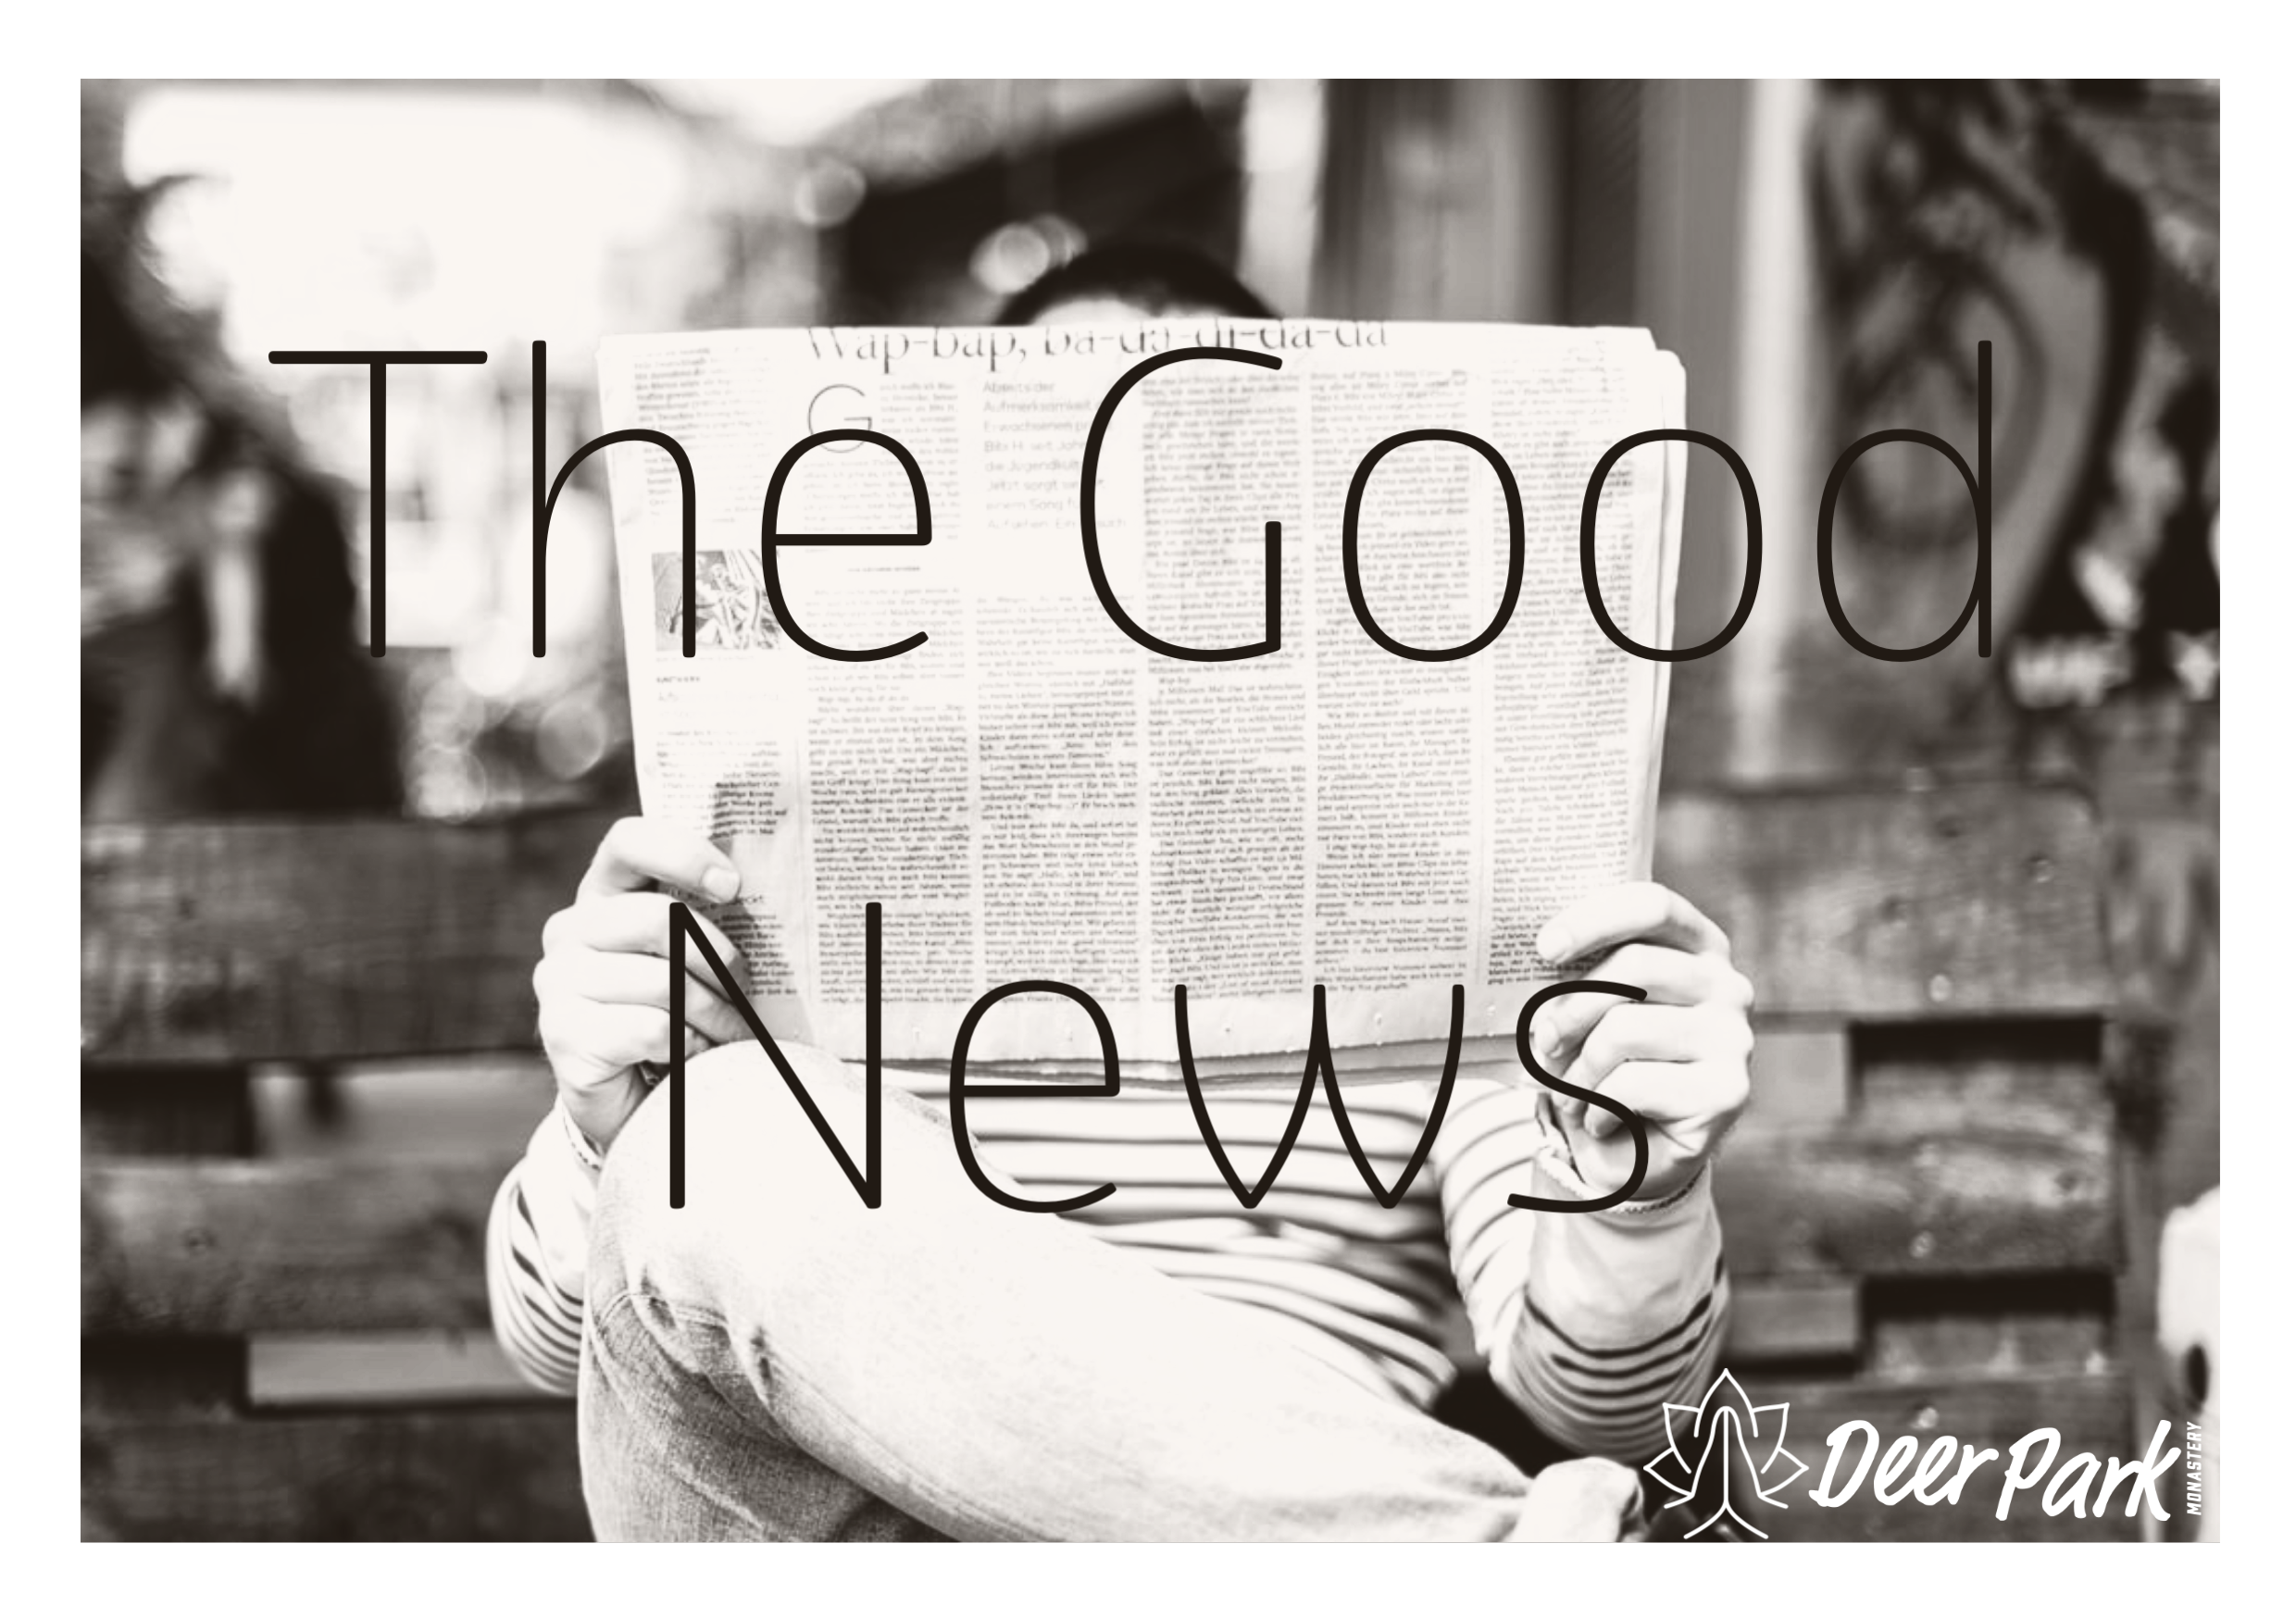 The Good News. Newspaper being read by person.